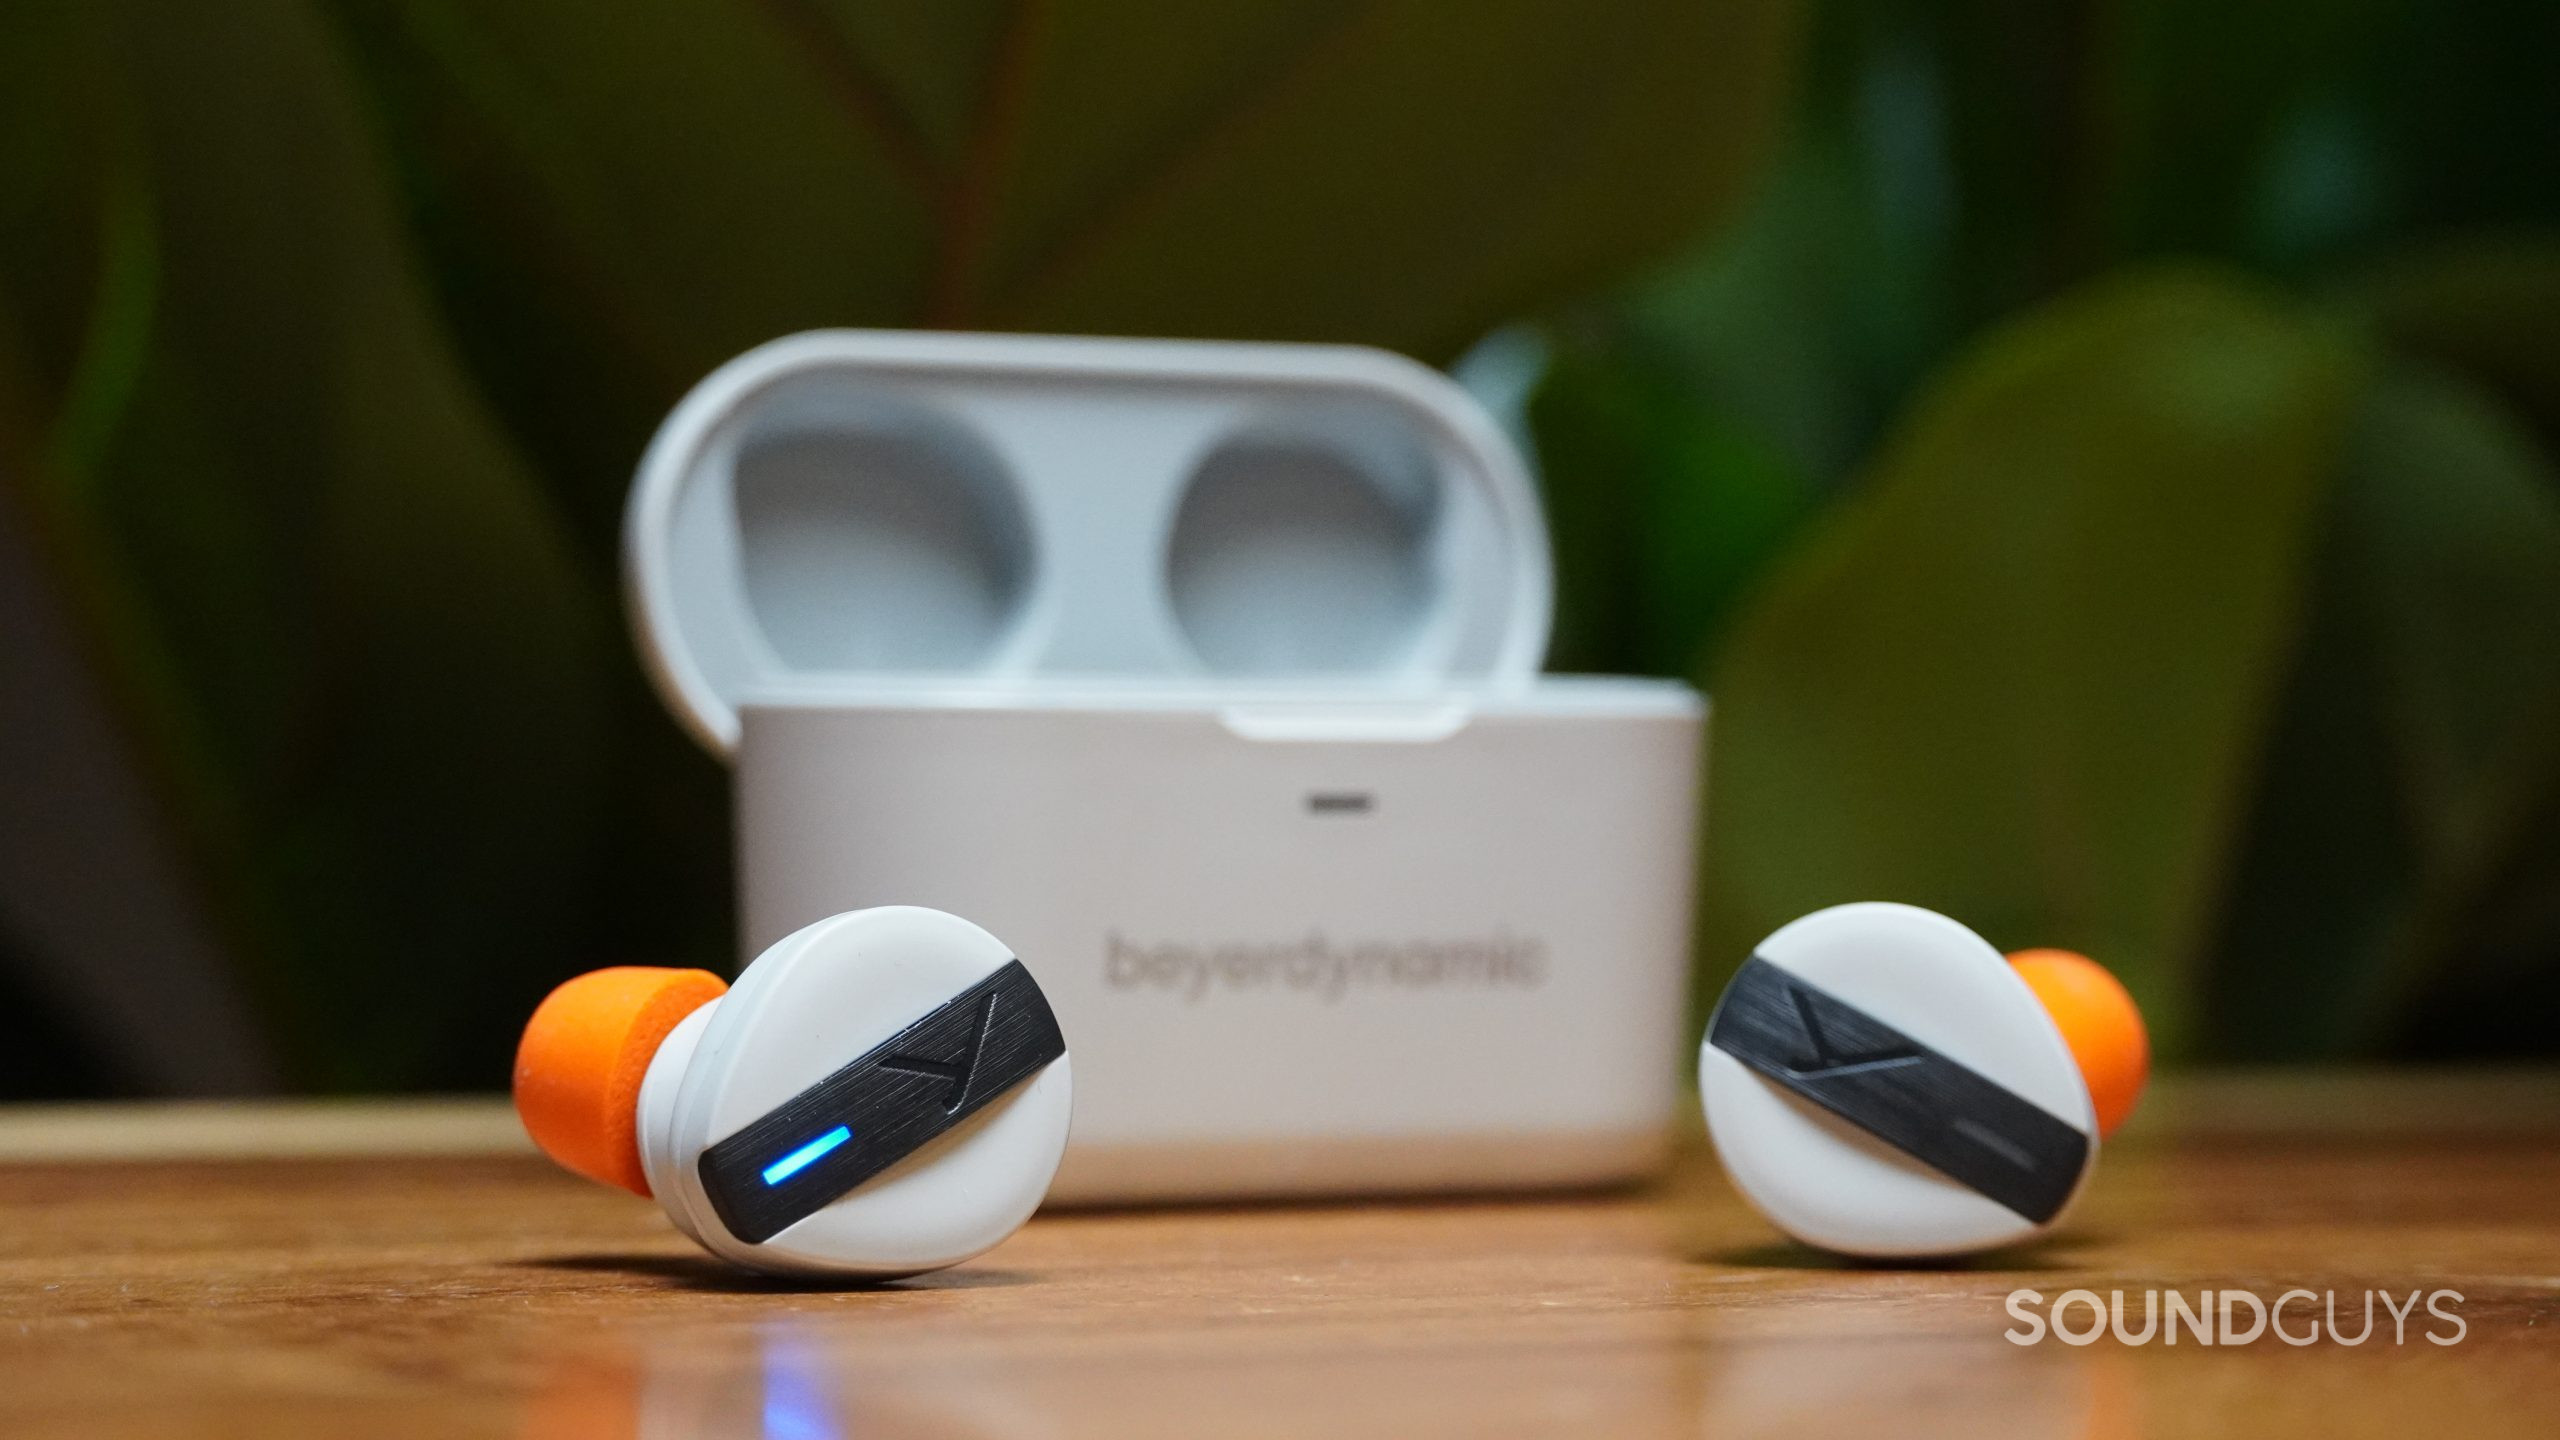 Beyerdynamic Free BYRD earbuds in front of charging case on a wood table.